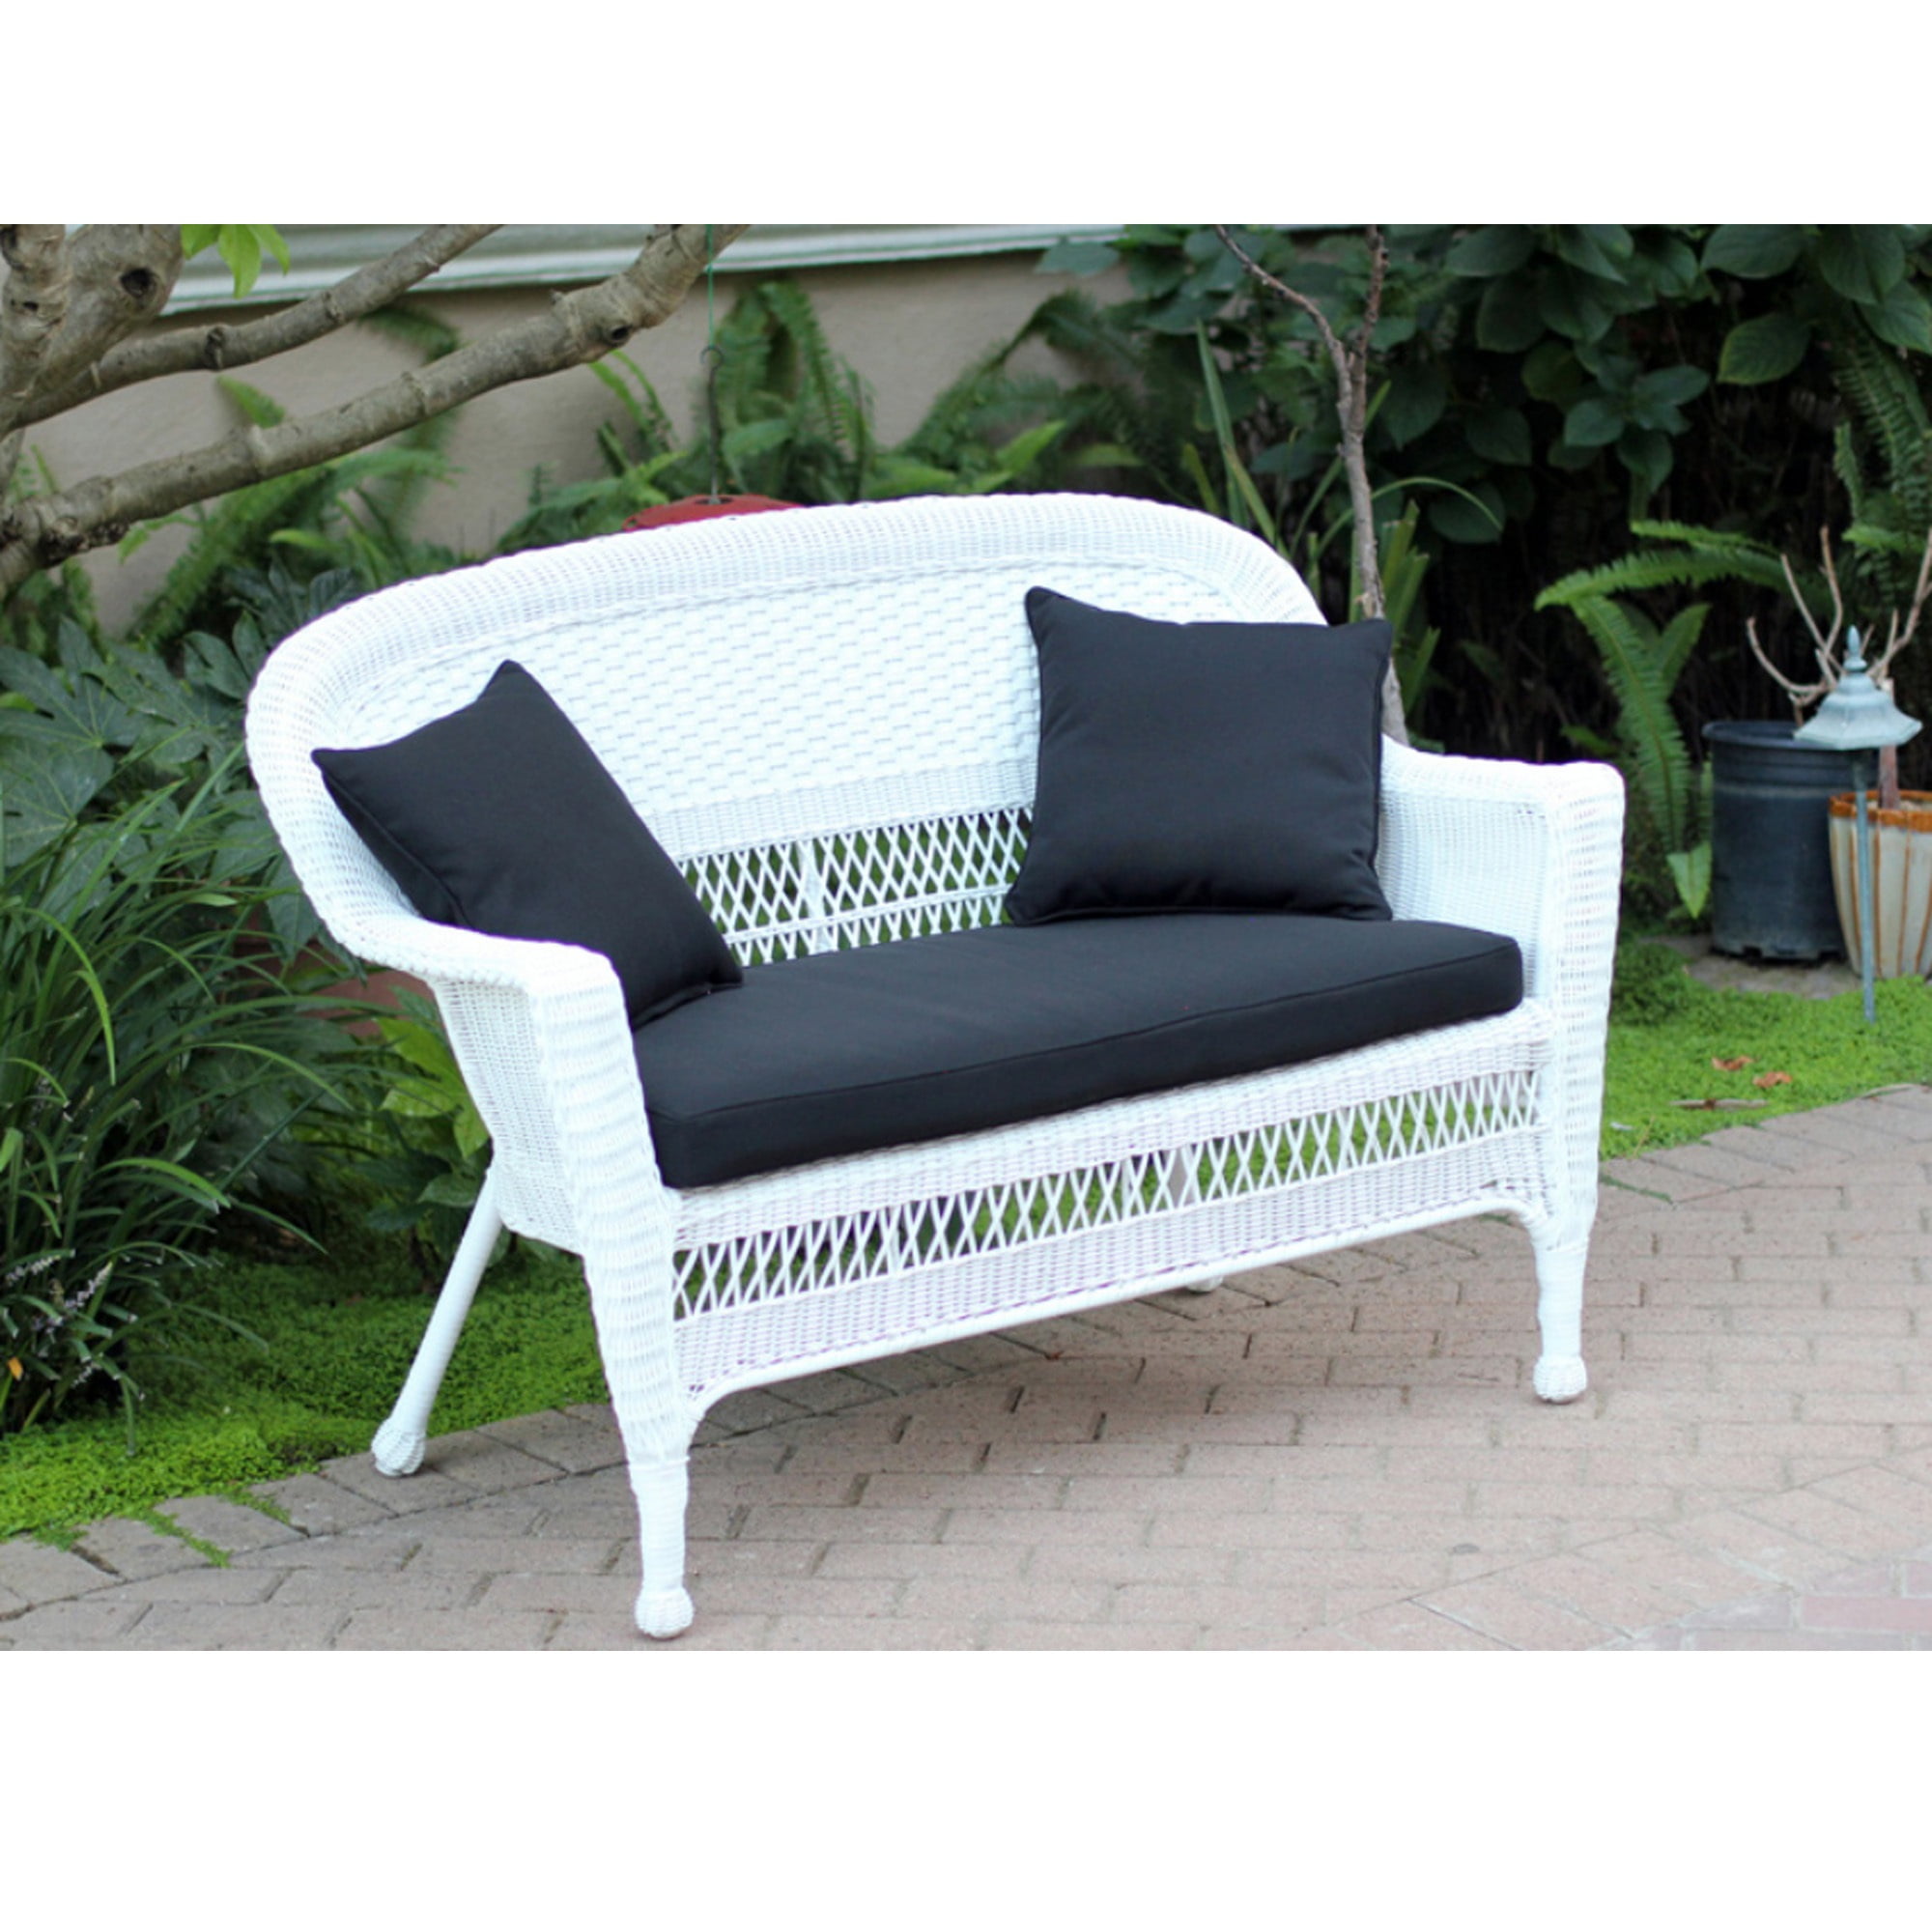 51 Jasmine White Resin Wicker Patio Loveseat With Midnight Black Cushion And Pillows 